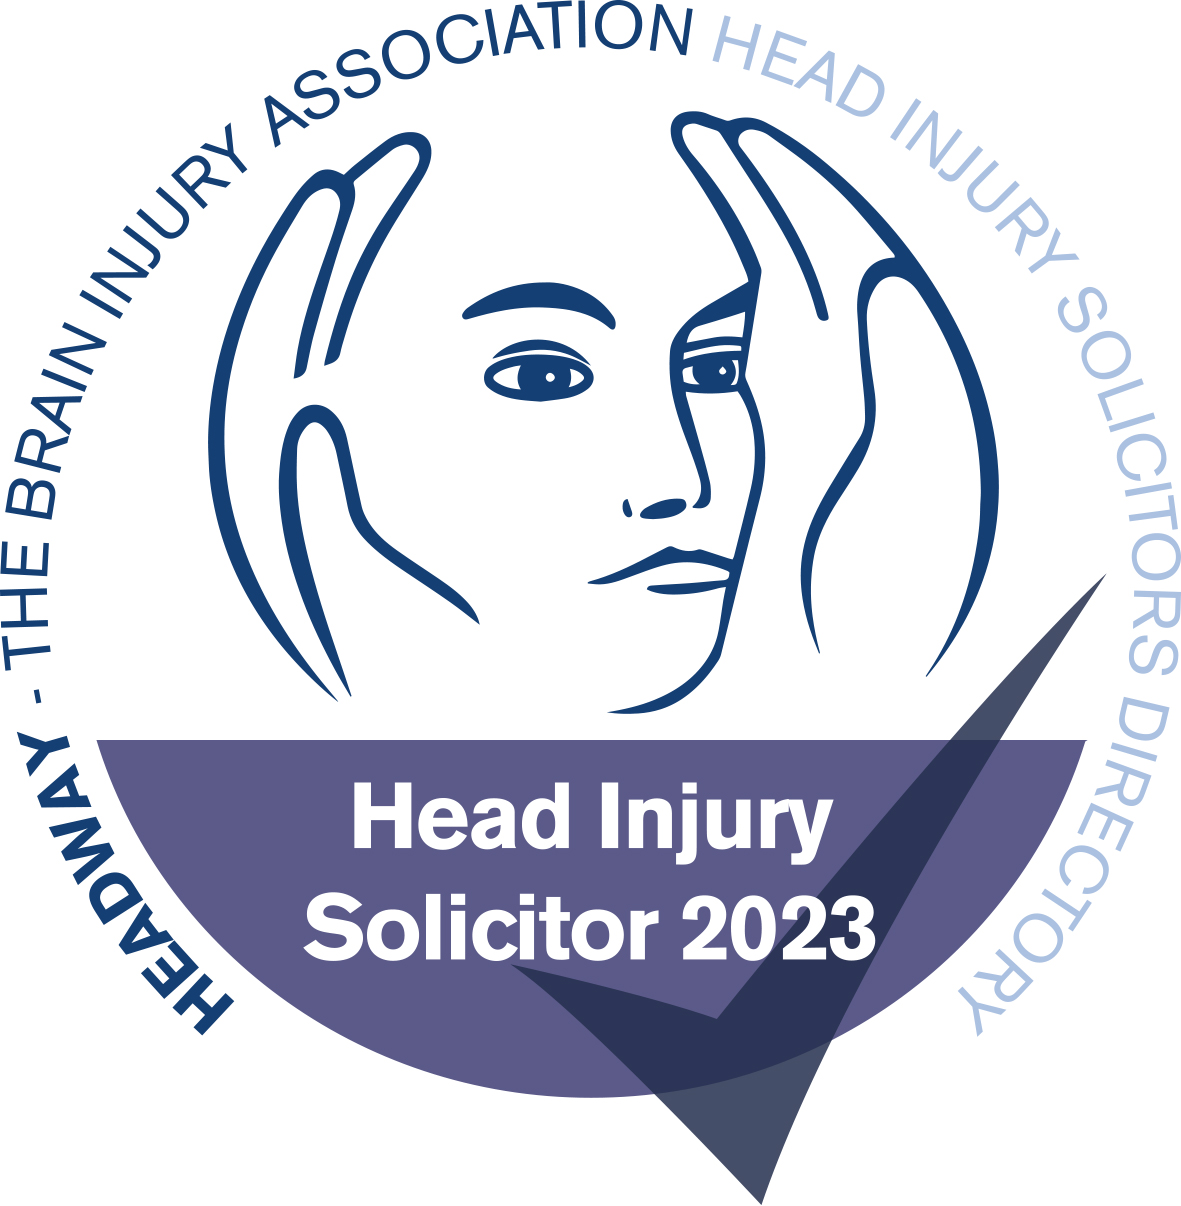 Headway Solicitors Accreditation Logo 2023